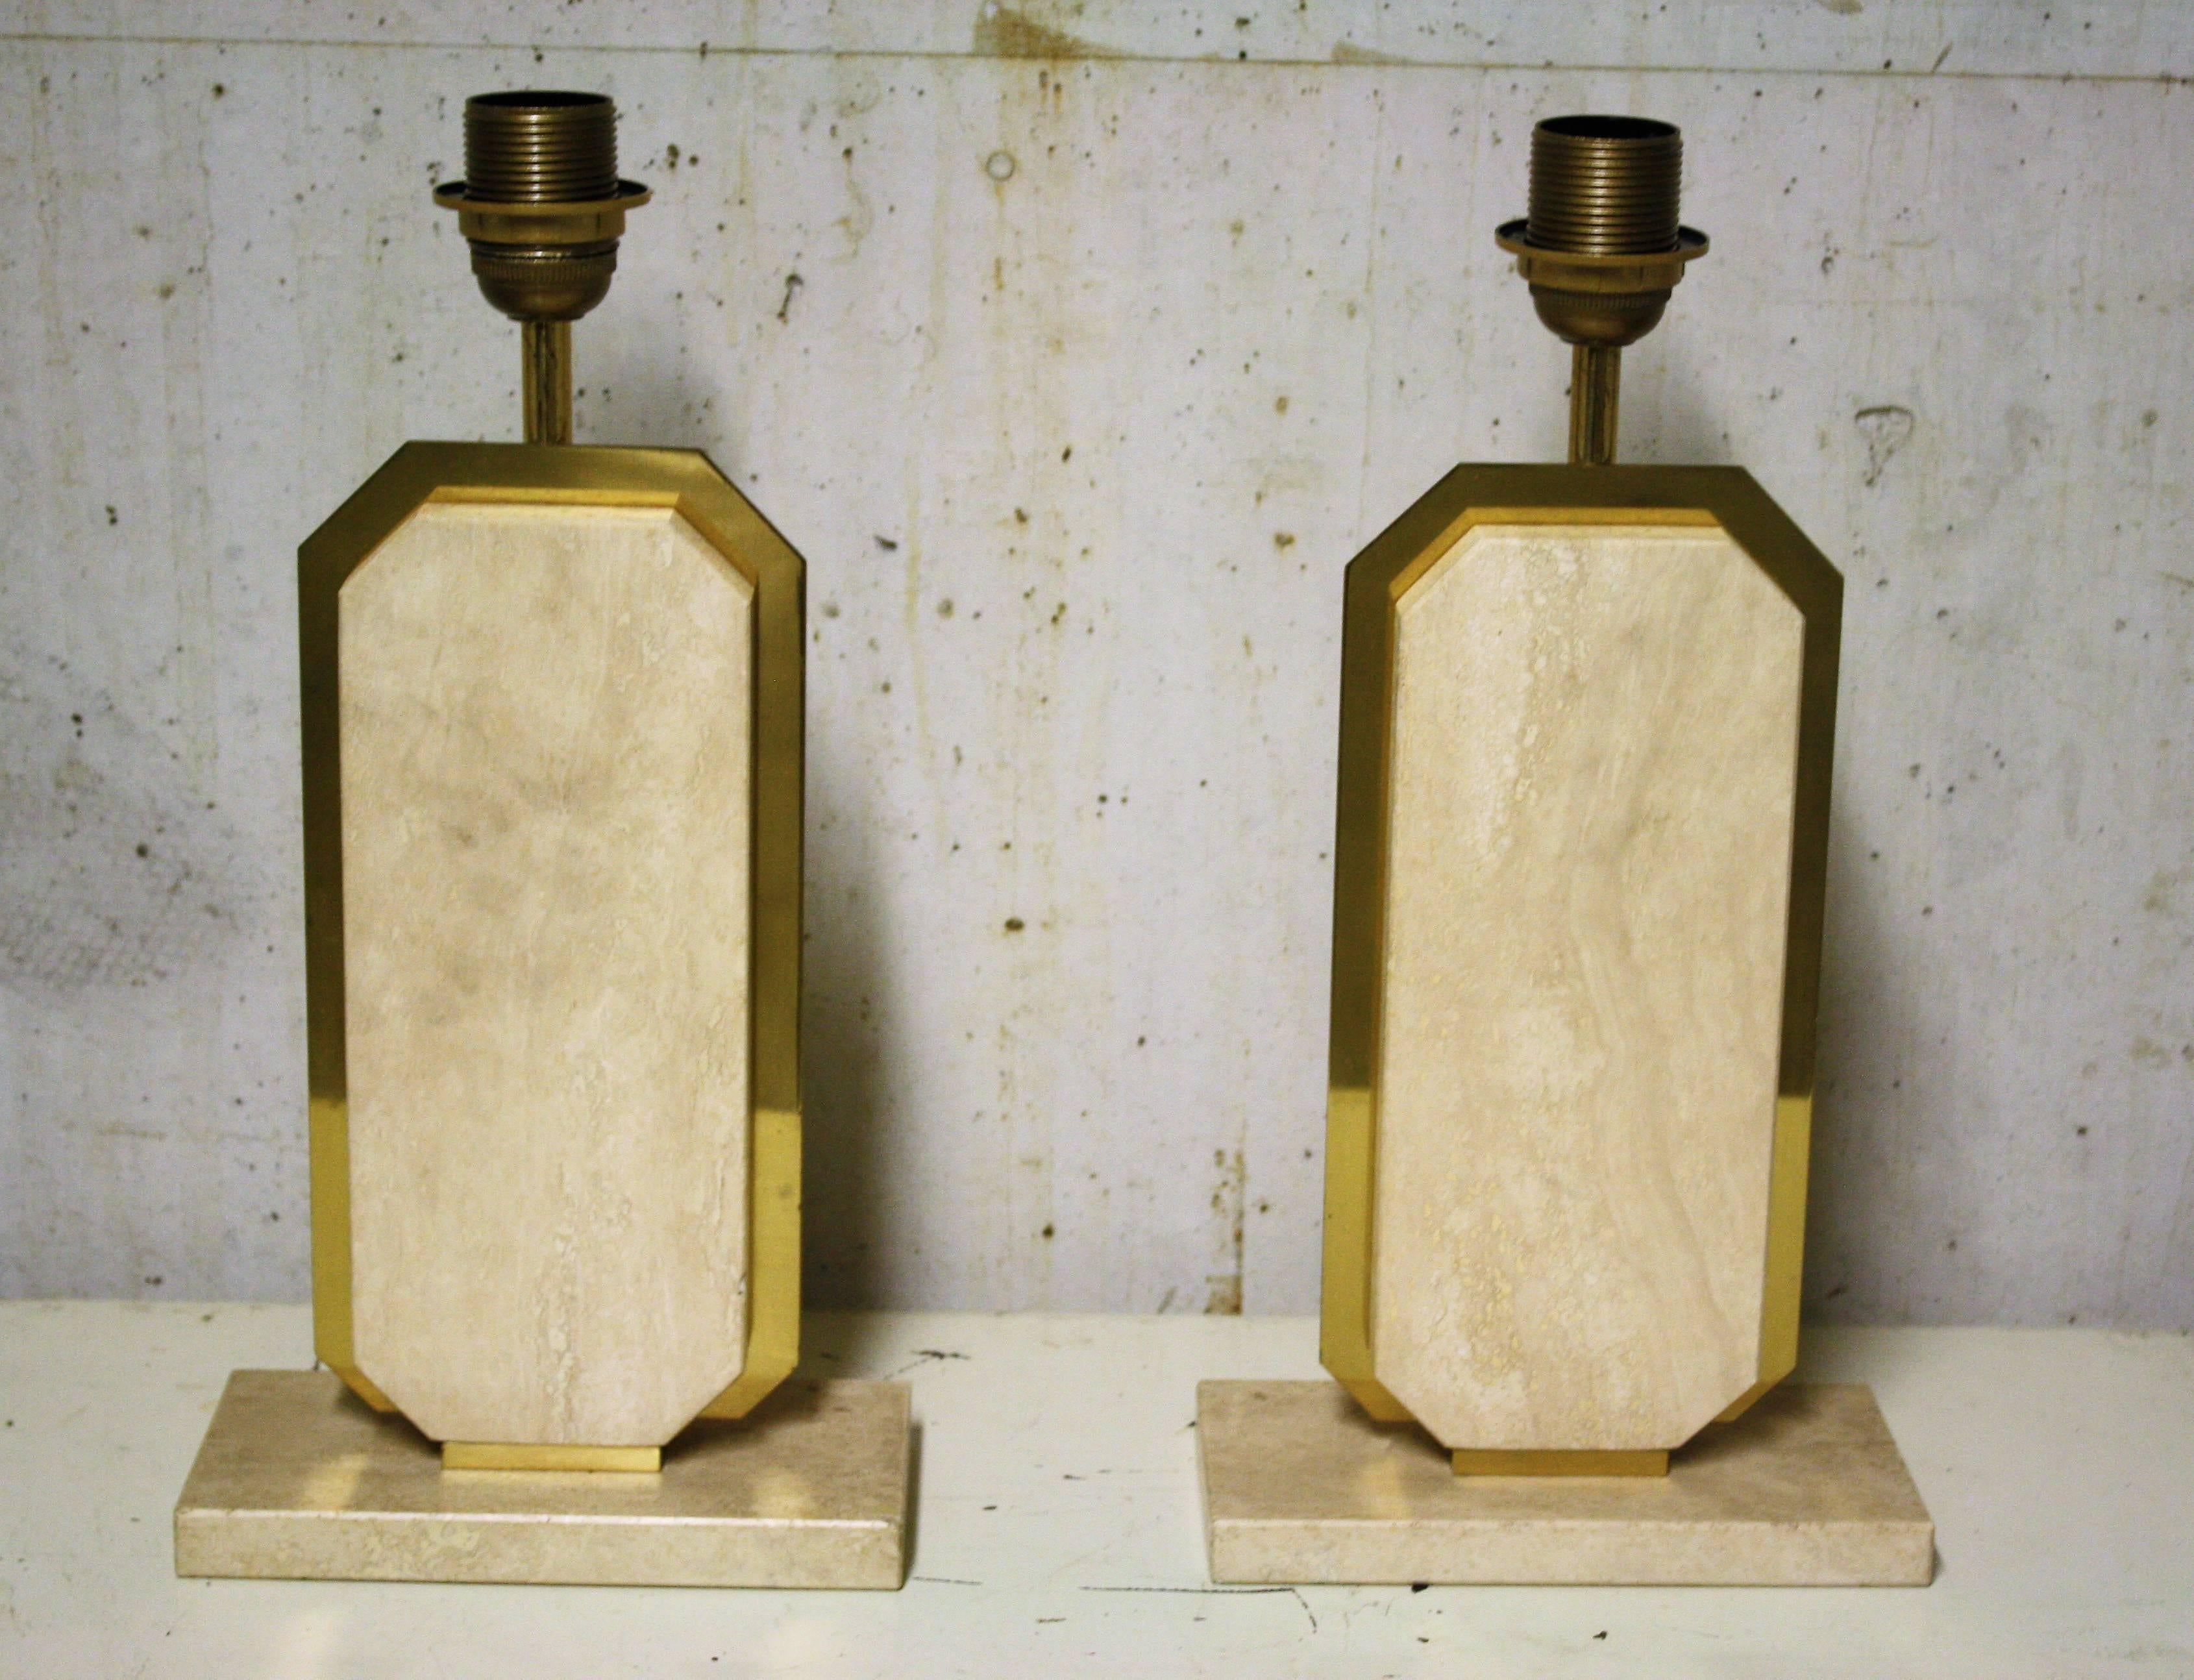 Pair of heavy travertine table lamps with brass.

This pair looks charming and the materials and design make it still look fresh today.

The travertine stone has a beautiful color.

Travertine is usually found in Italy. The colosseum is one of